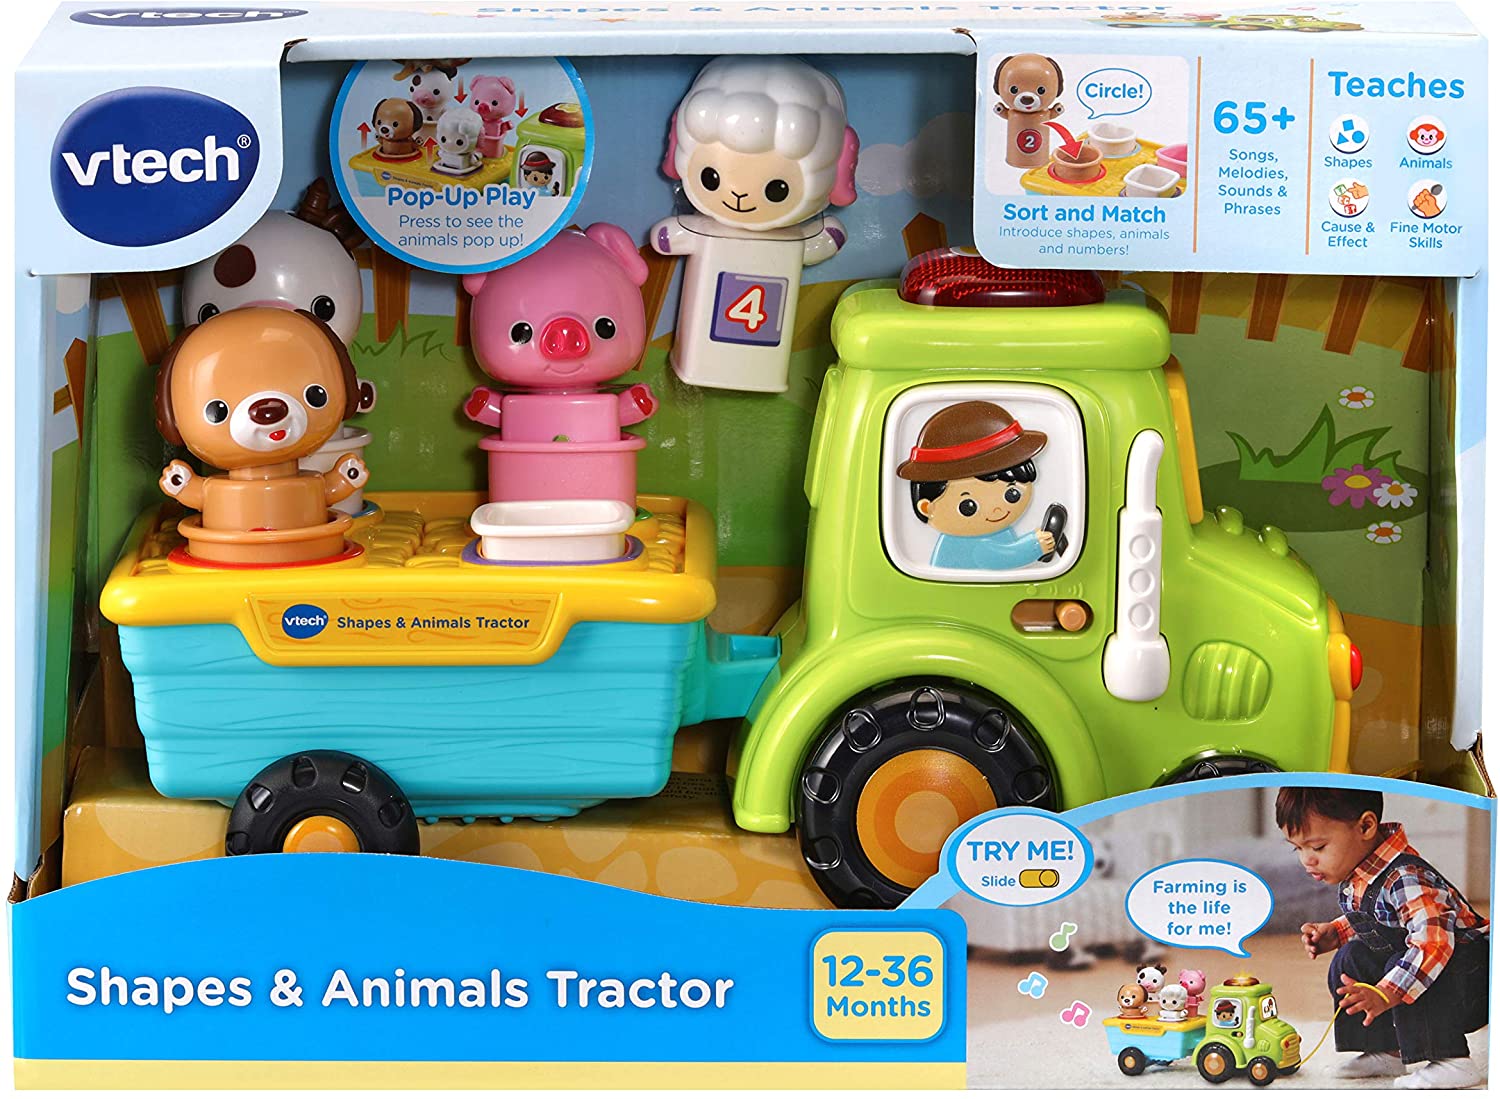 VTech Shapes & Animals Tractor